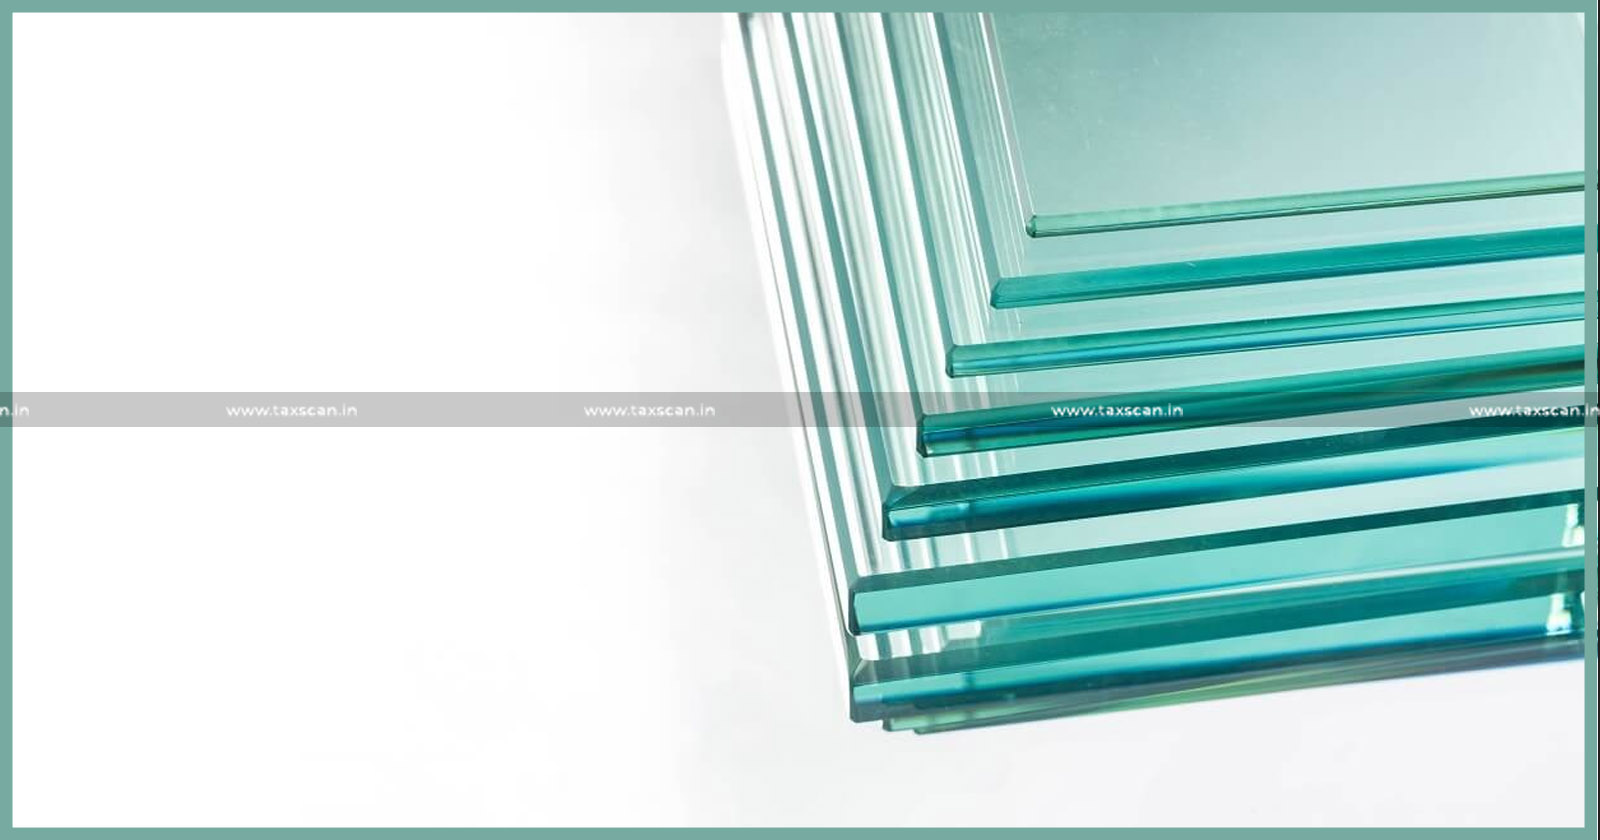 Ministry of Finance - Anti-Dumping Duty - Toughened Glass - taxscan